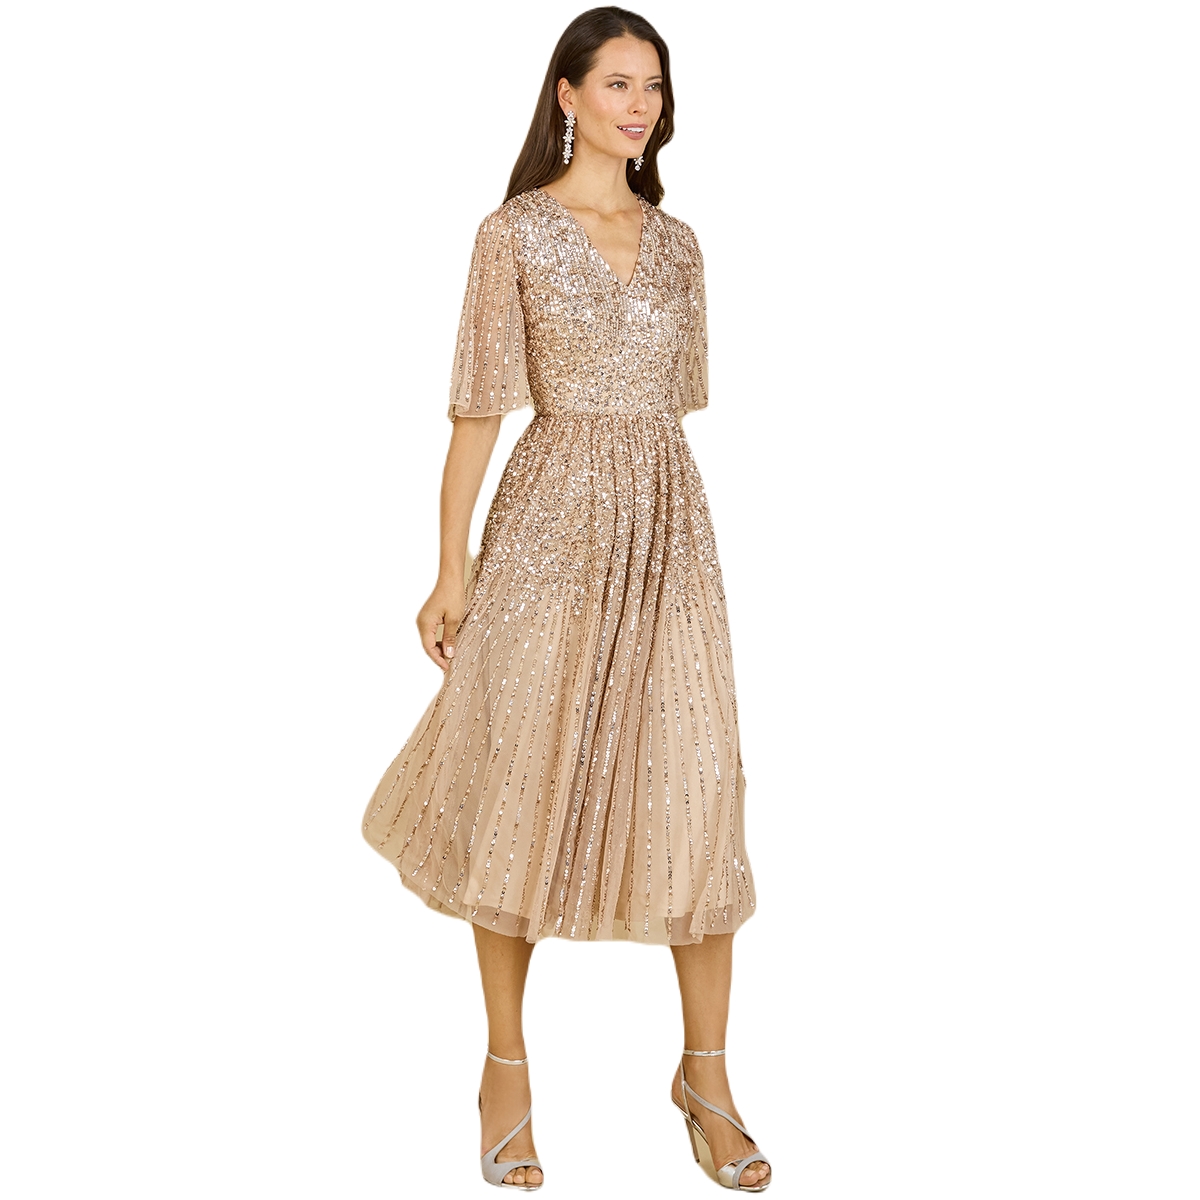 Women's Flowing, Sequin Midi Dress with Short Sleeves - Periwinkle